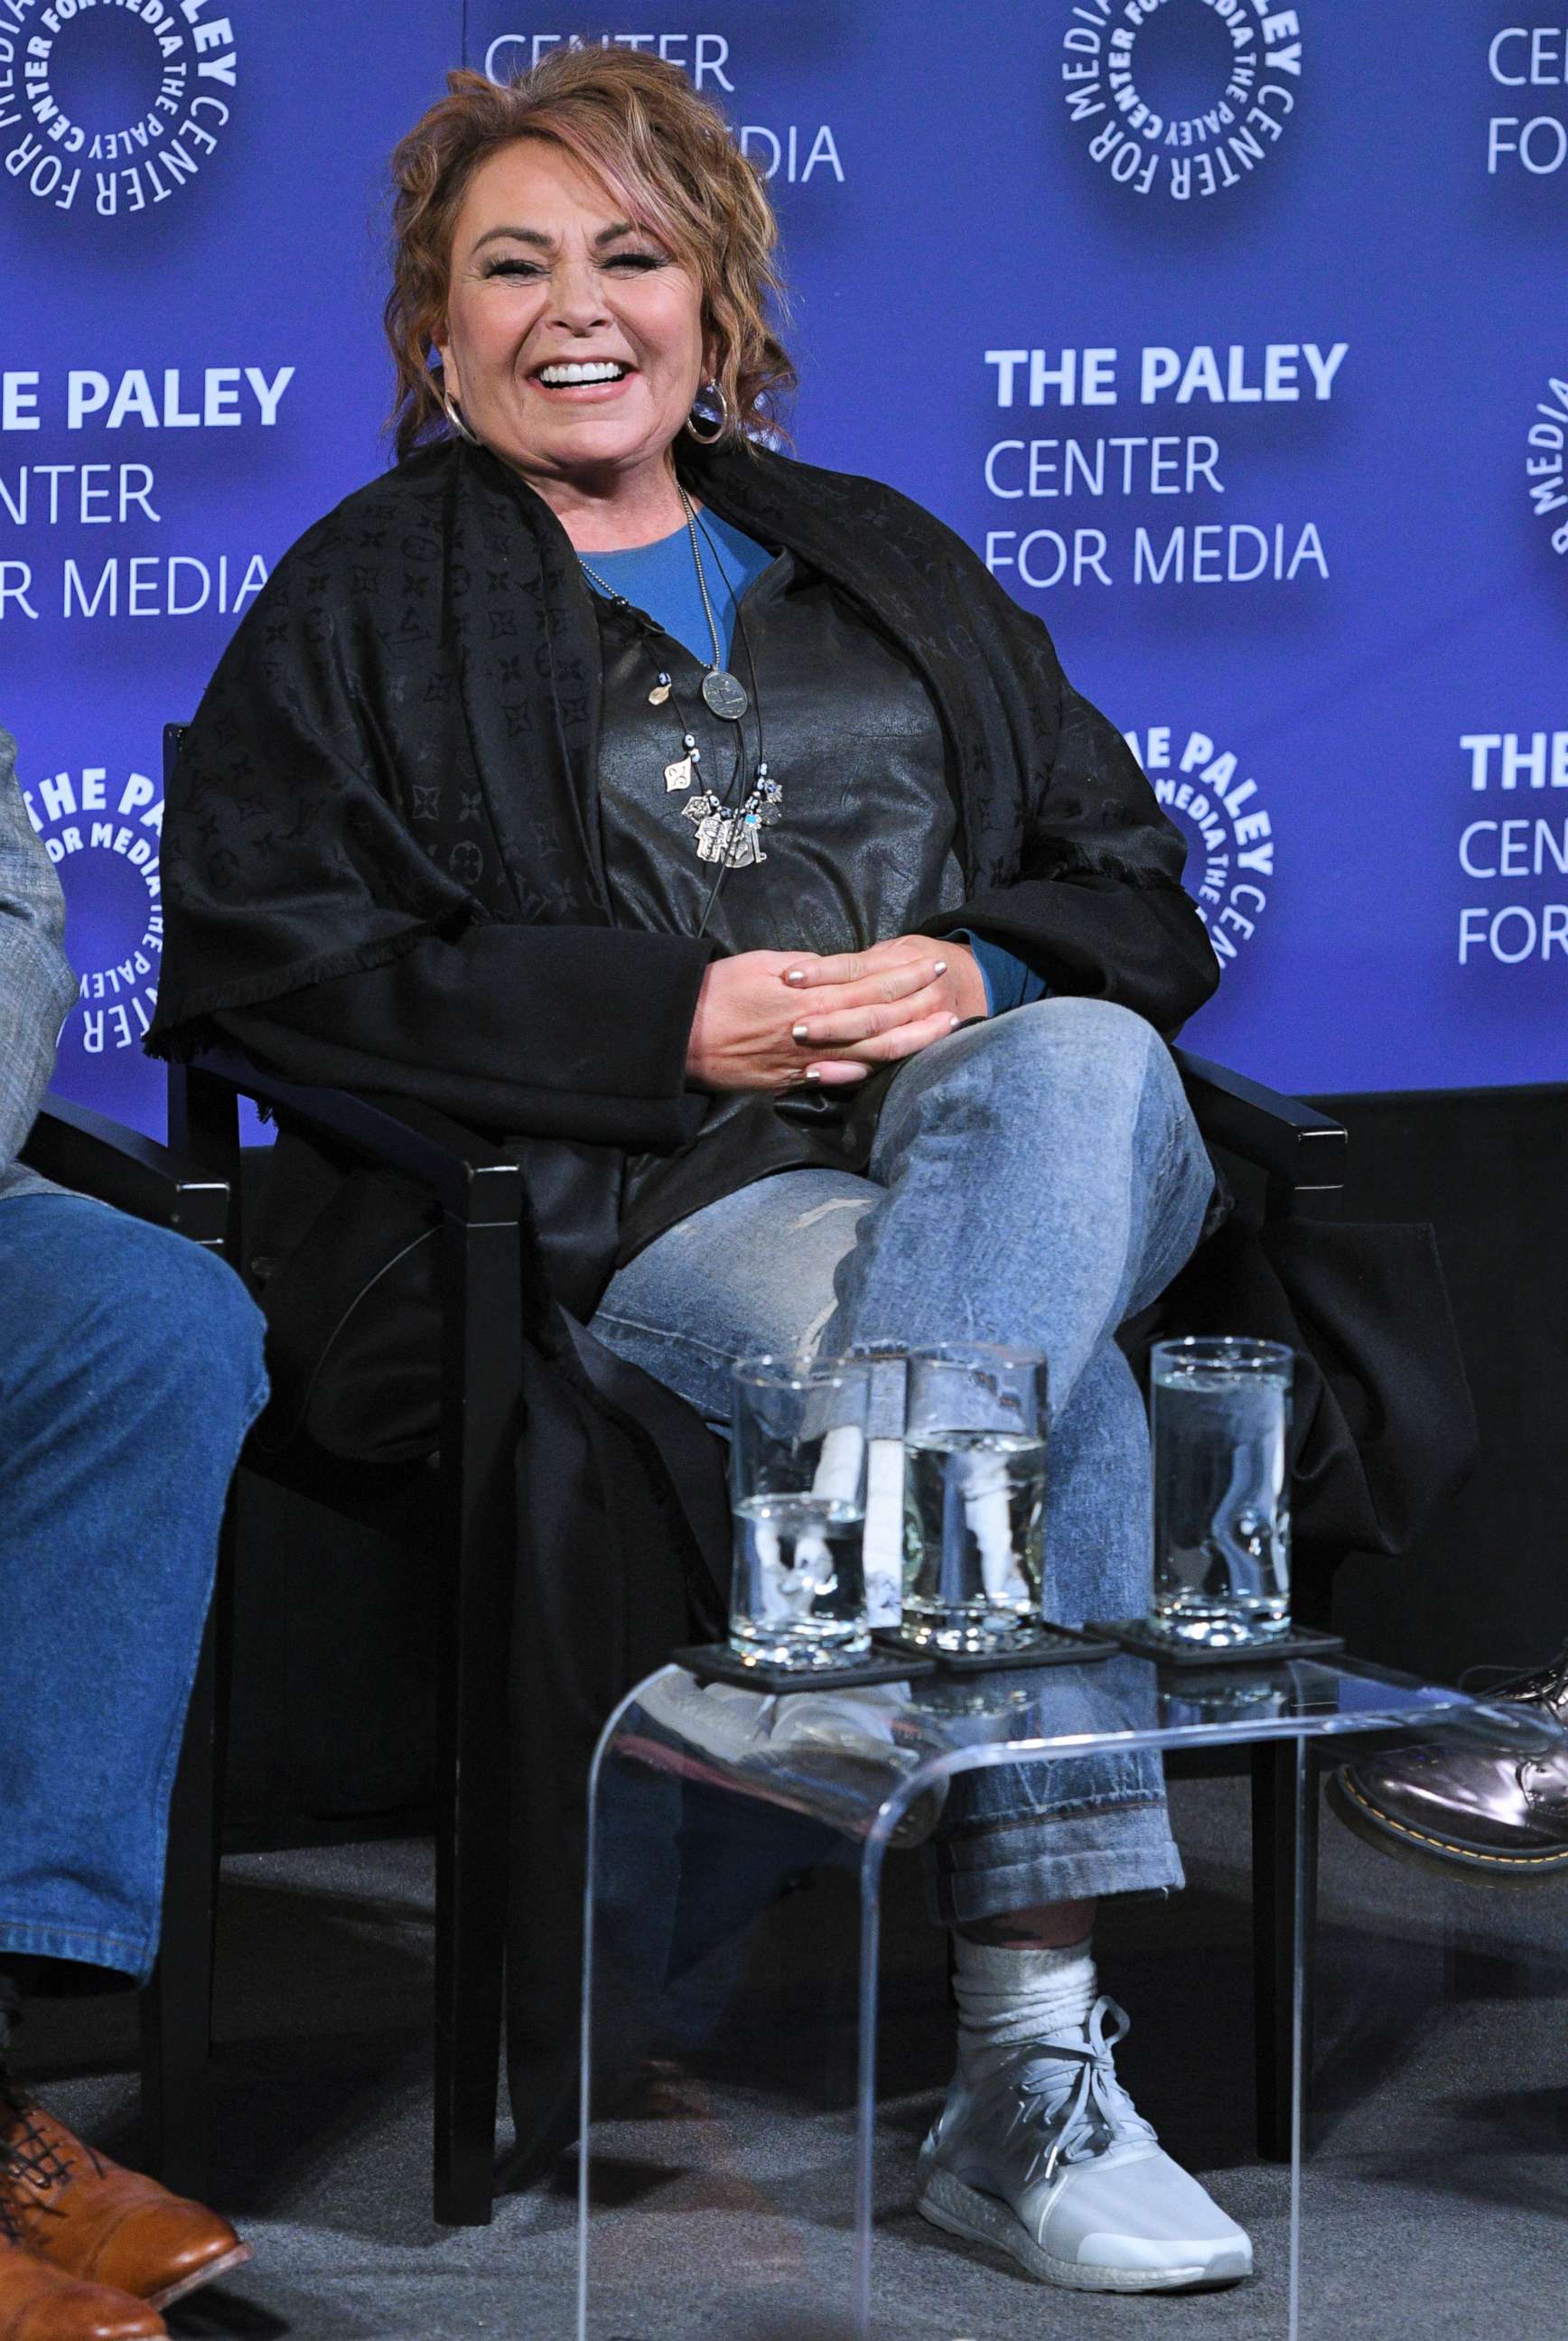 PHOTO: Roseanne Barr participates in a panel at the Paley Center for Media on March 26, 2018 in New York.